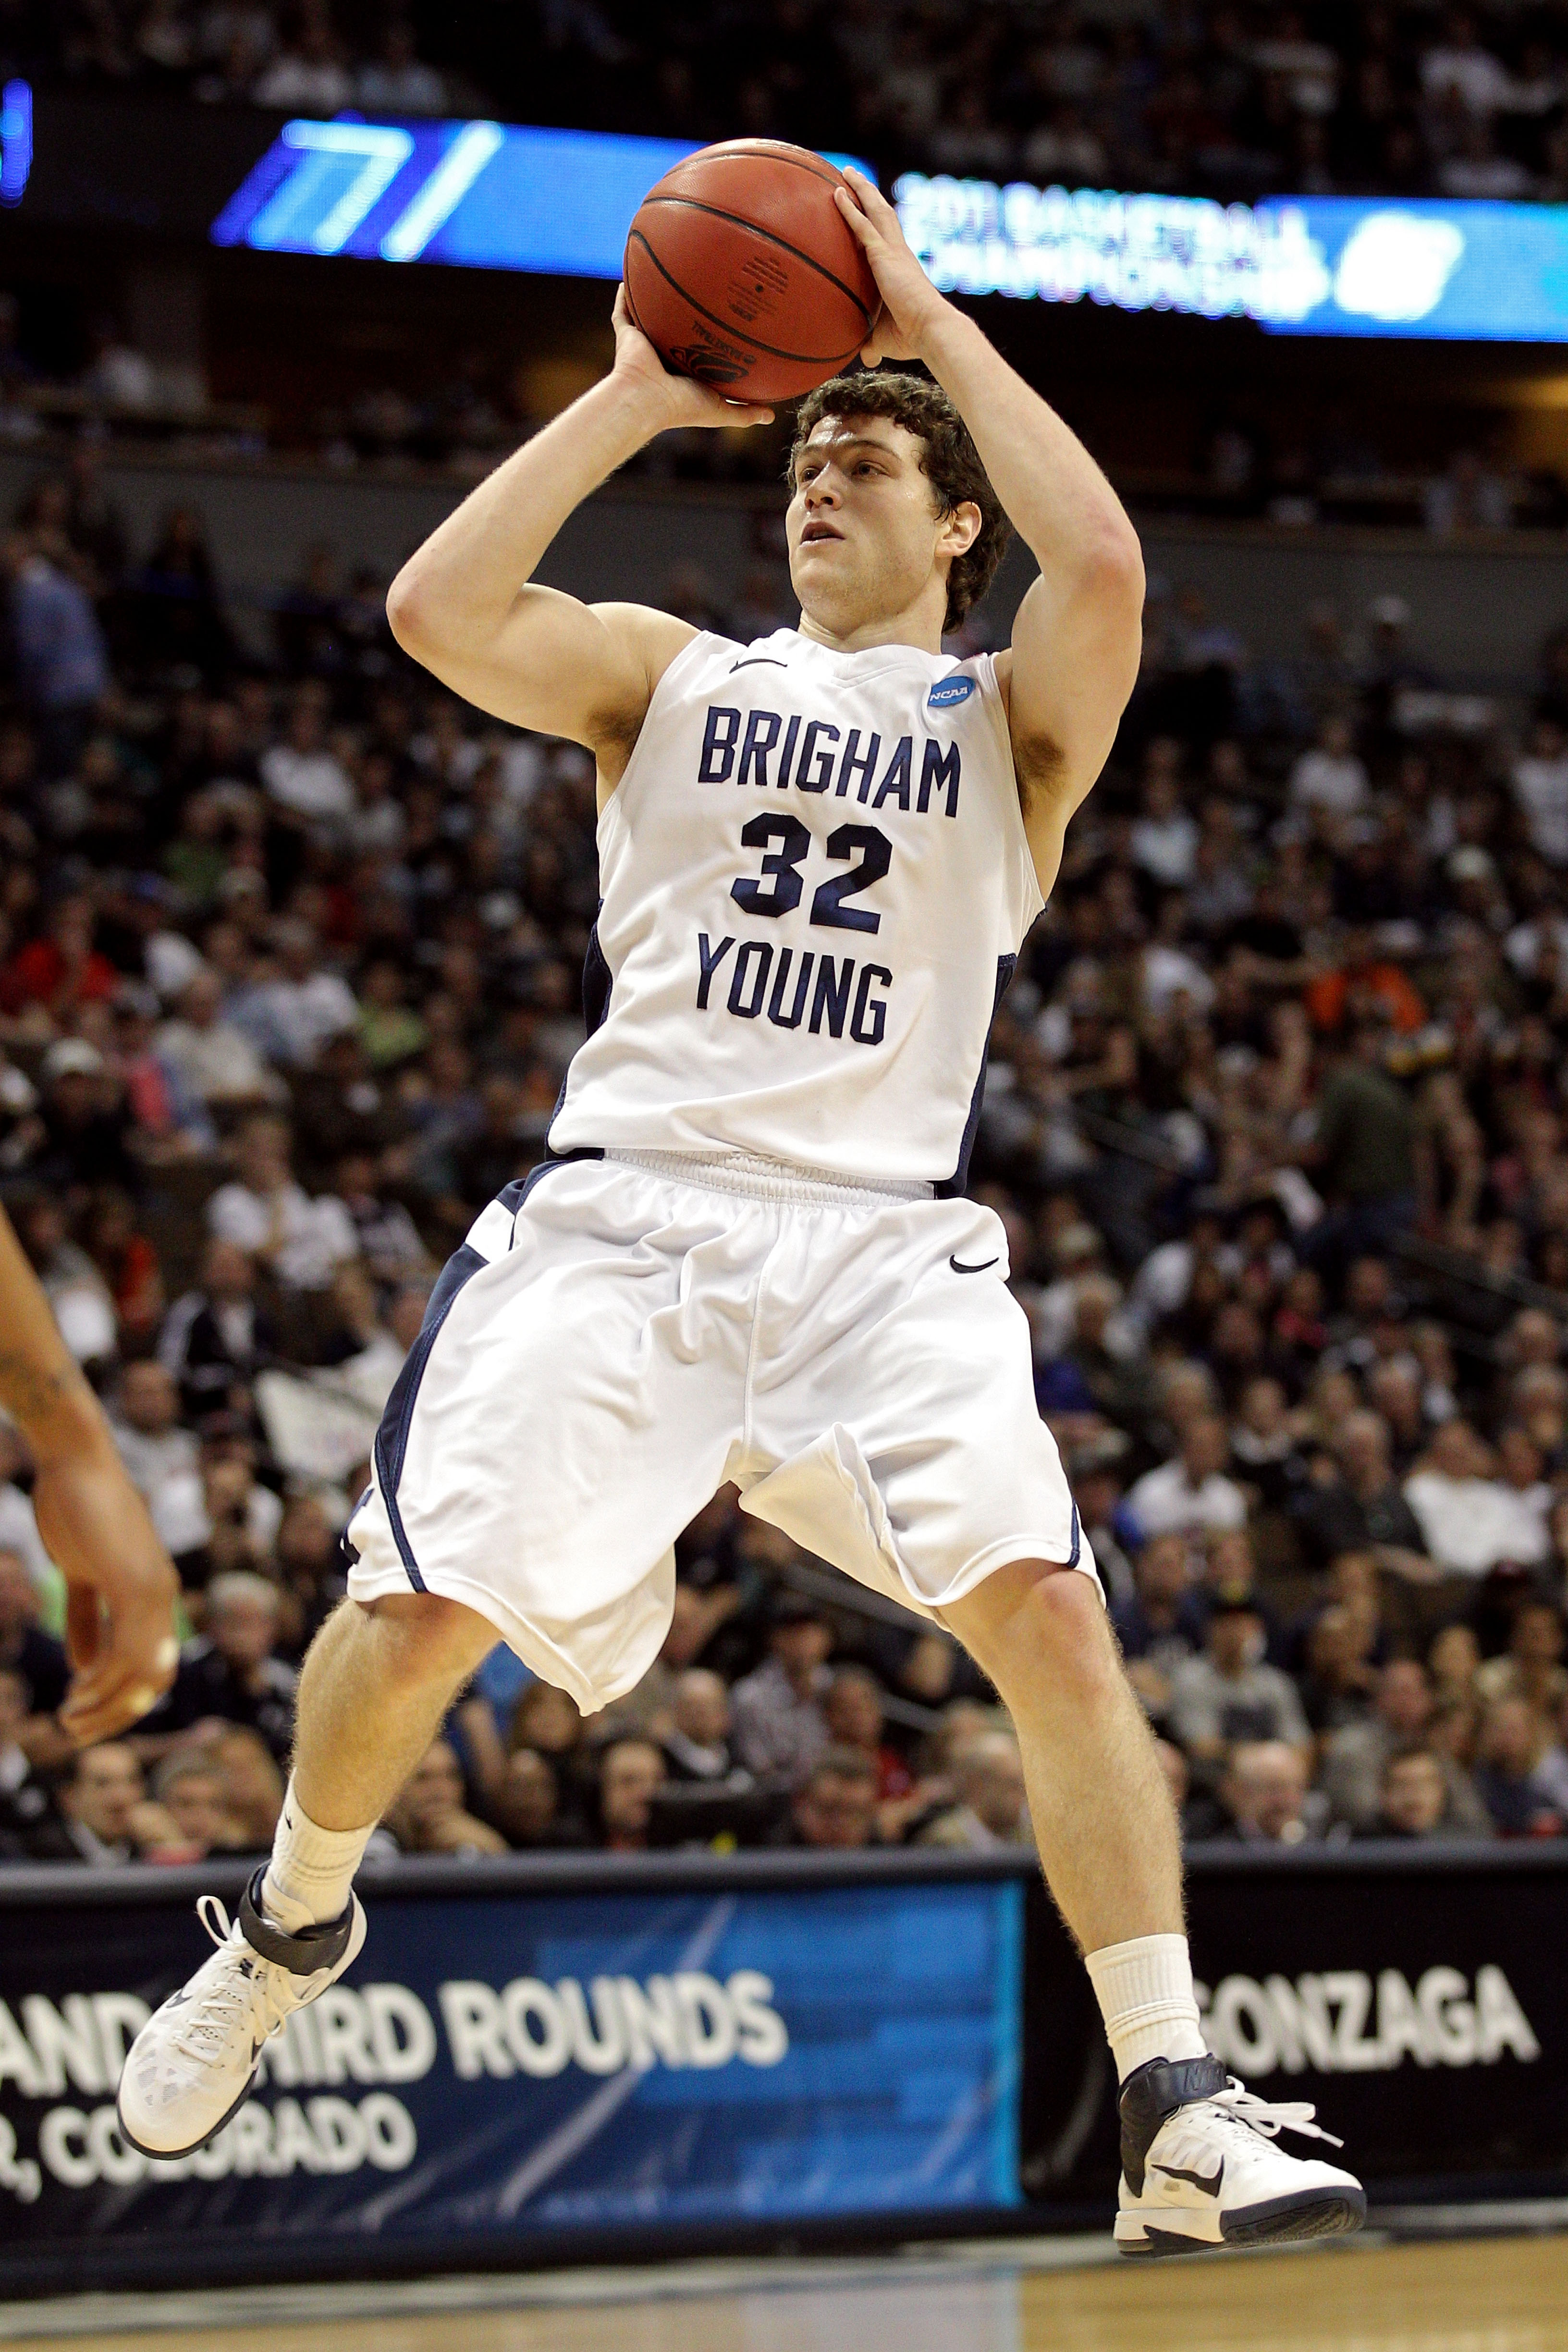 NBA Draft: Jimmer Fredette, Kemba Walker and the 10 Most Explosive